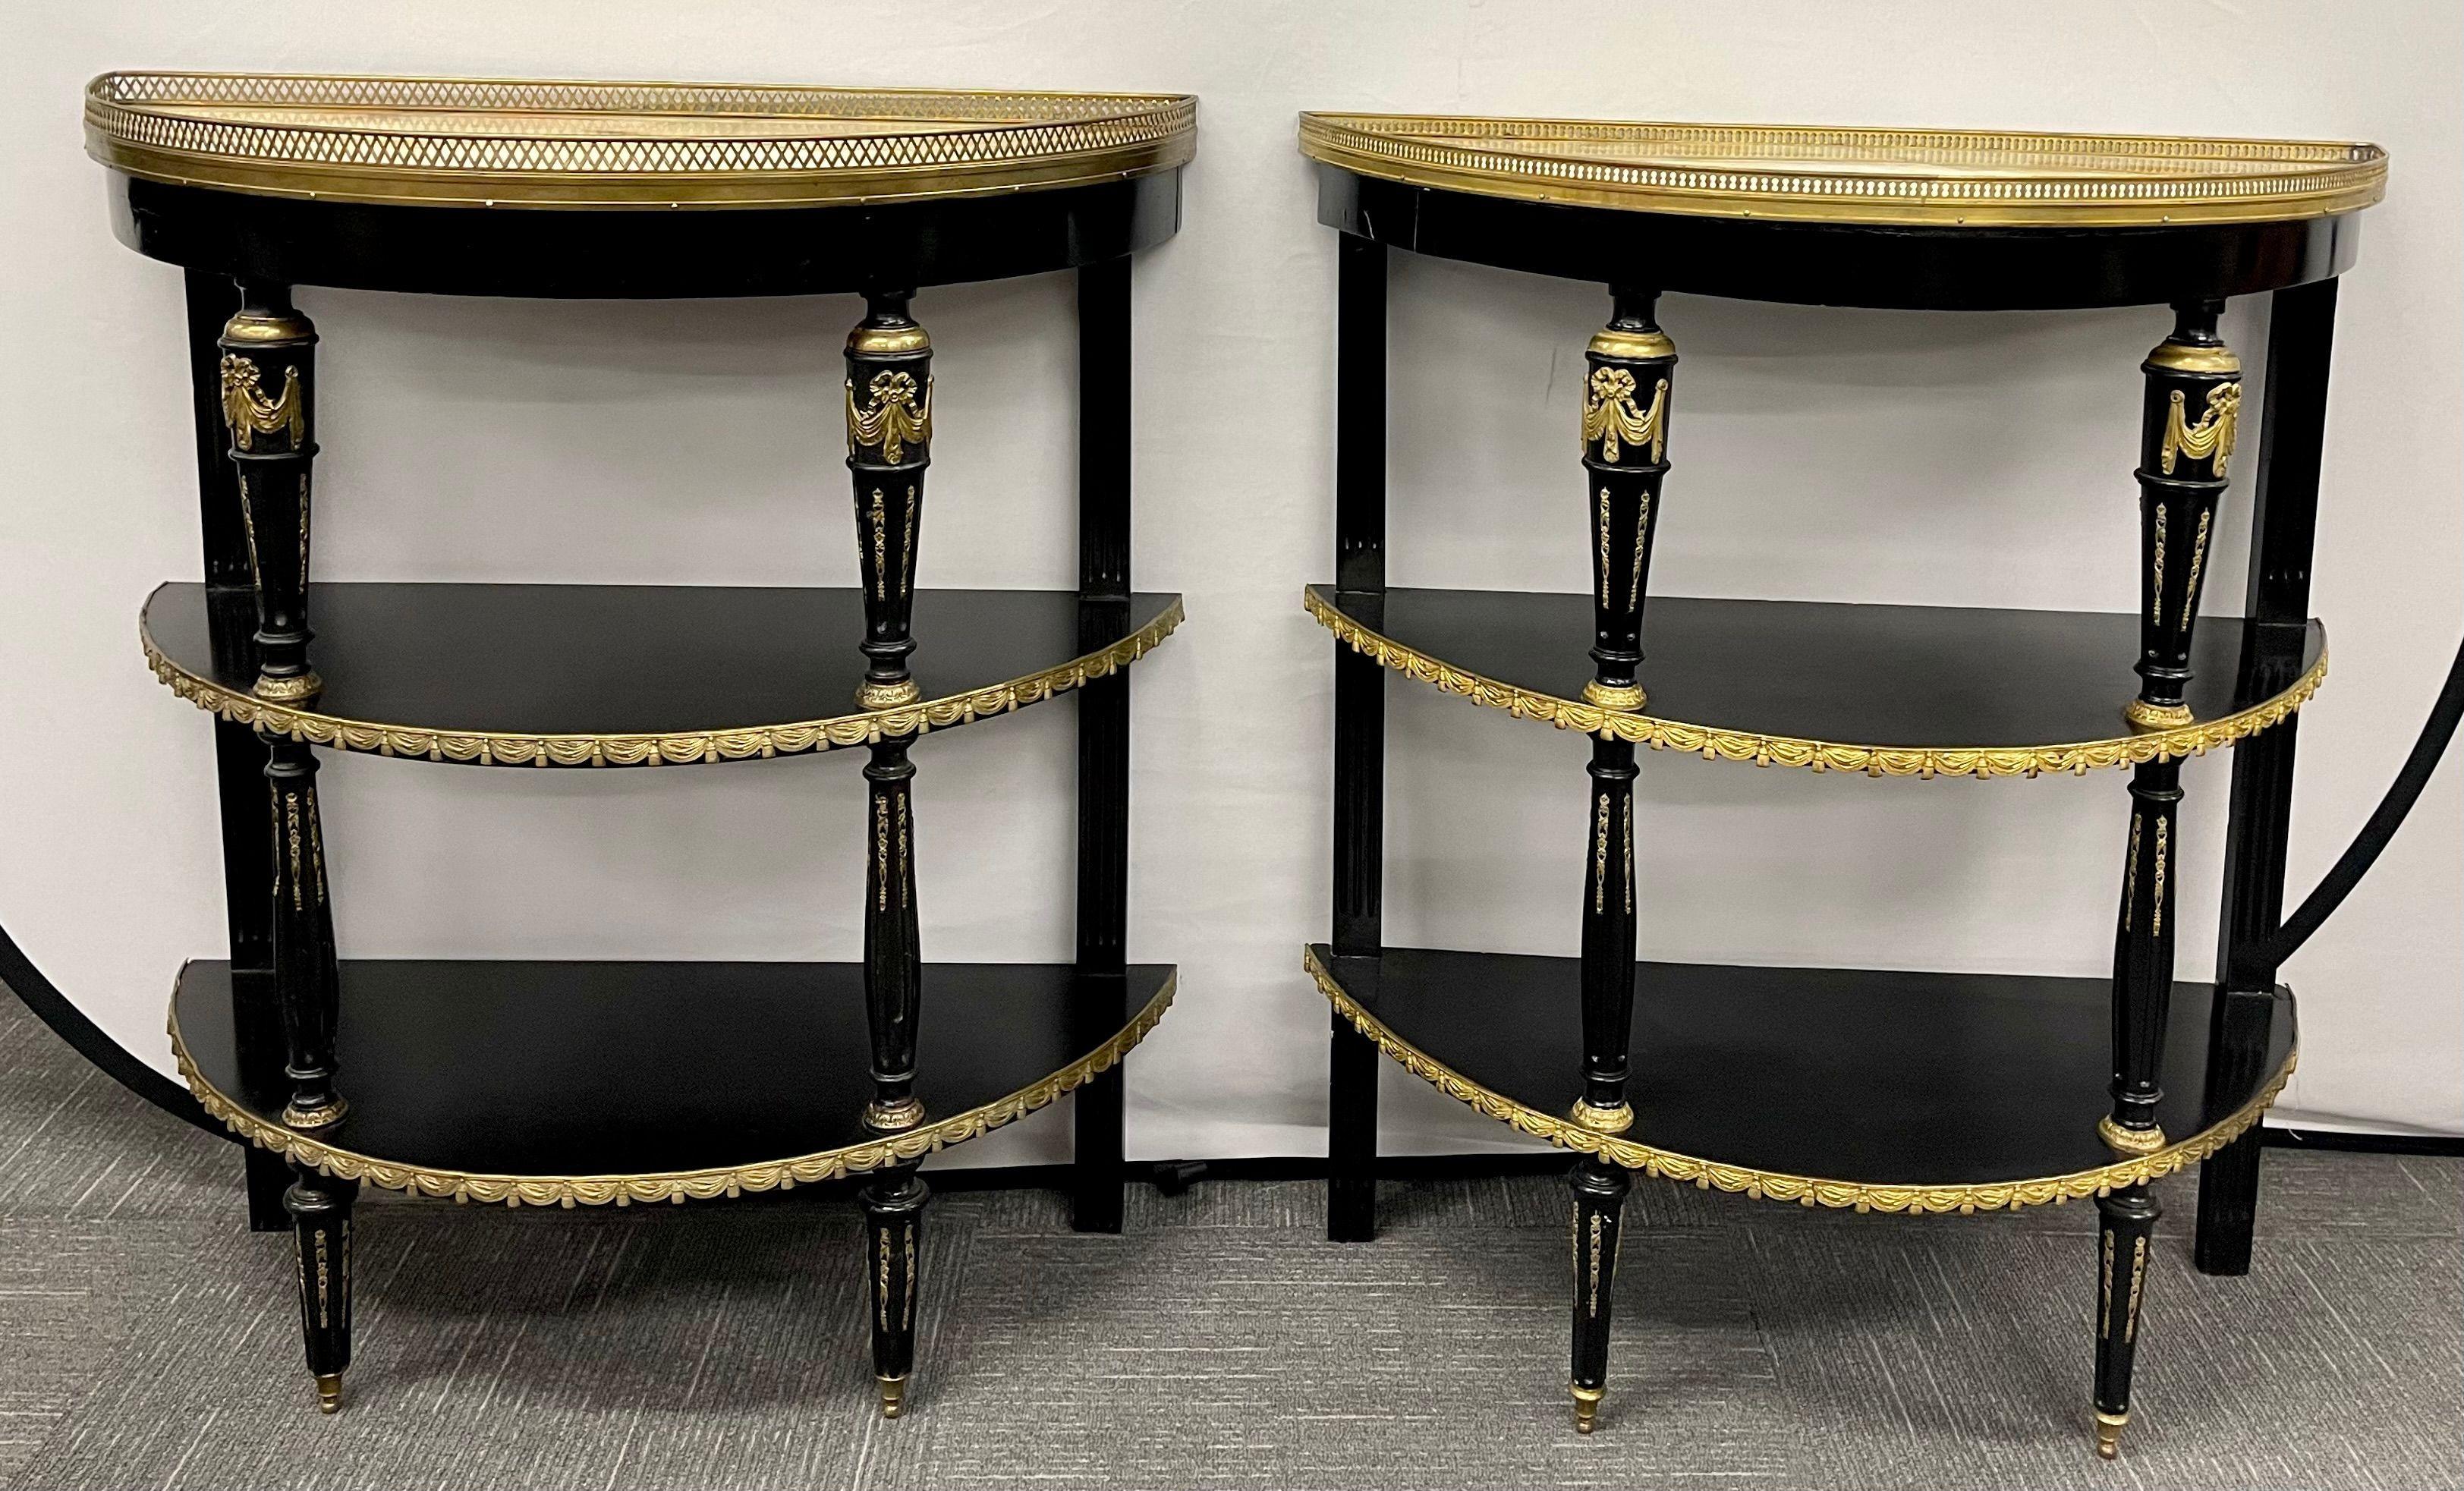 Hollywood Regency Compatible Pair of  Maison Jansen three-tier desert stand. This finest three-tier demilune each having bronze swags forming a well proportioned desert stand. The white galleried onyx (professionally repaired) tops sitting on top of